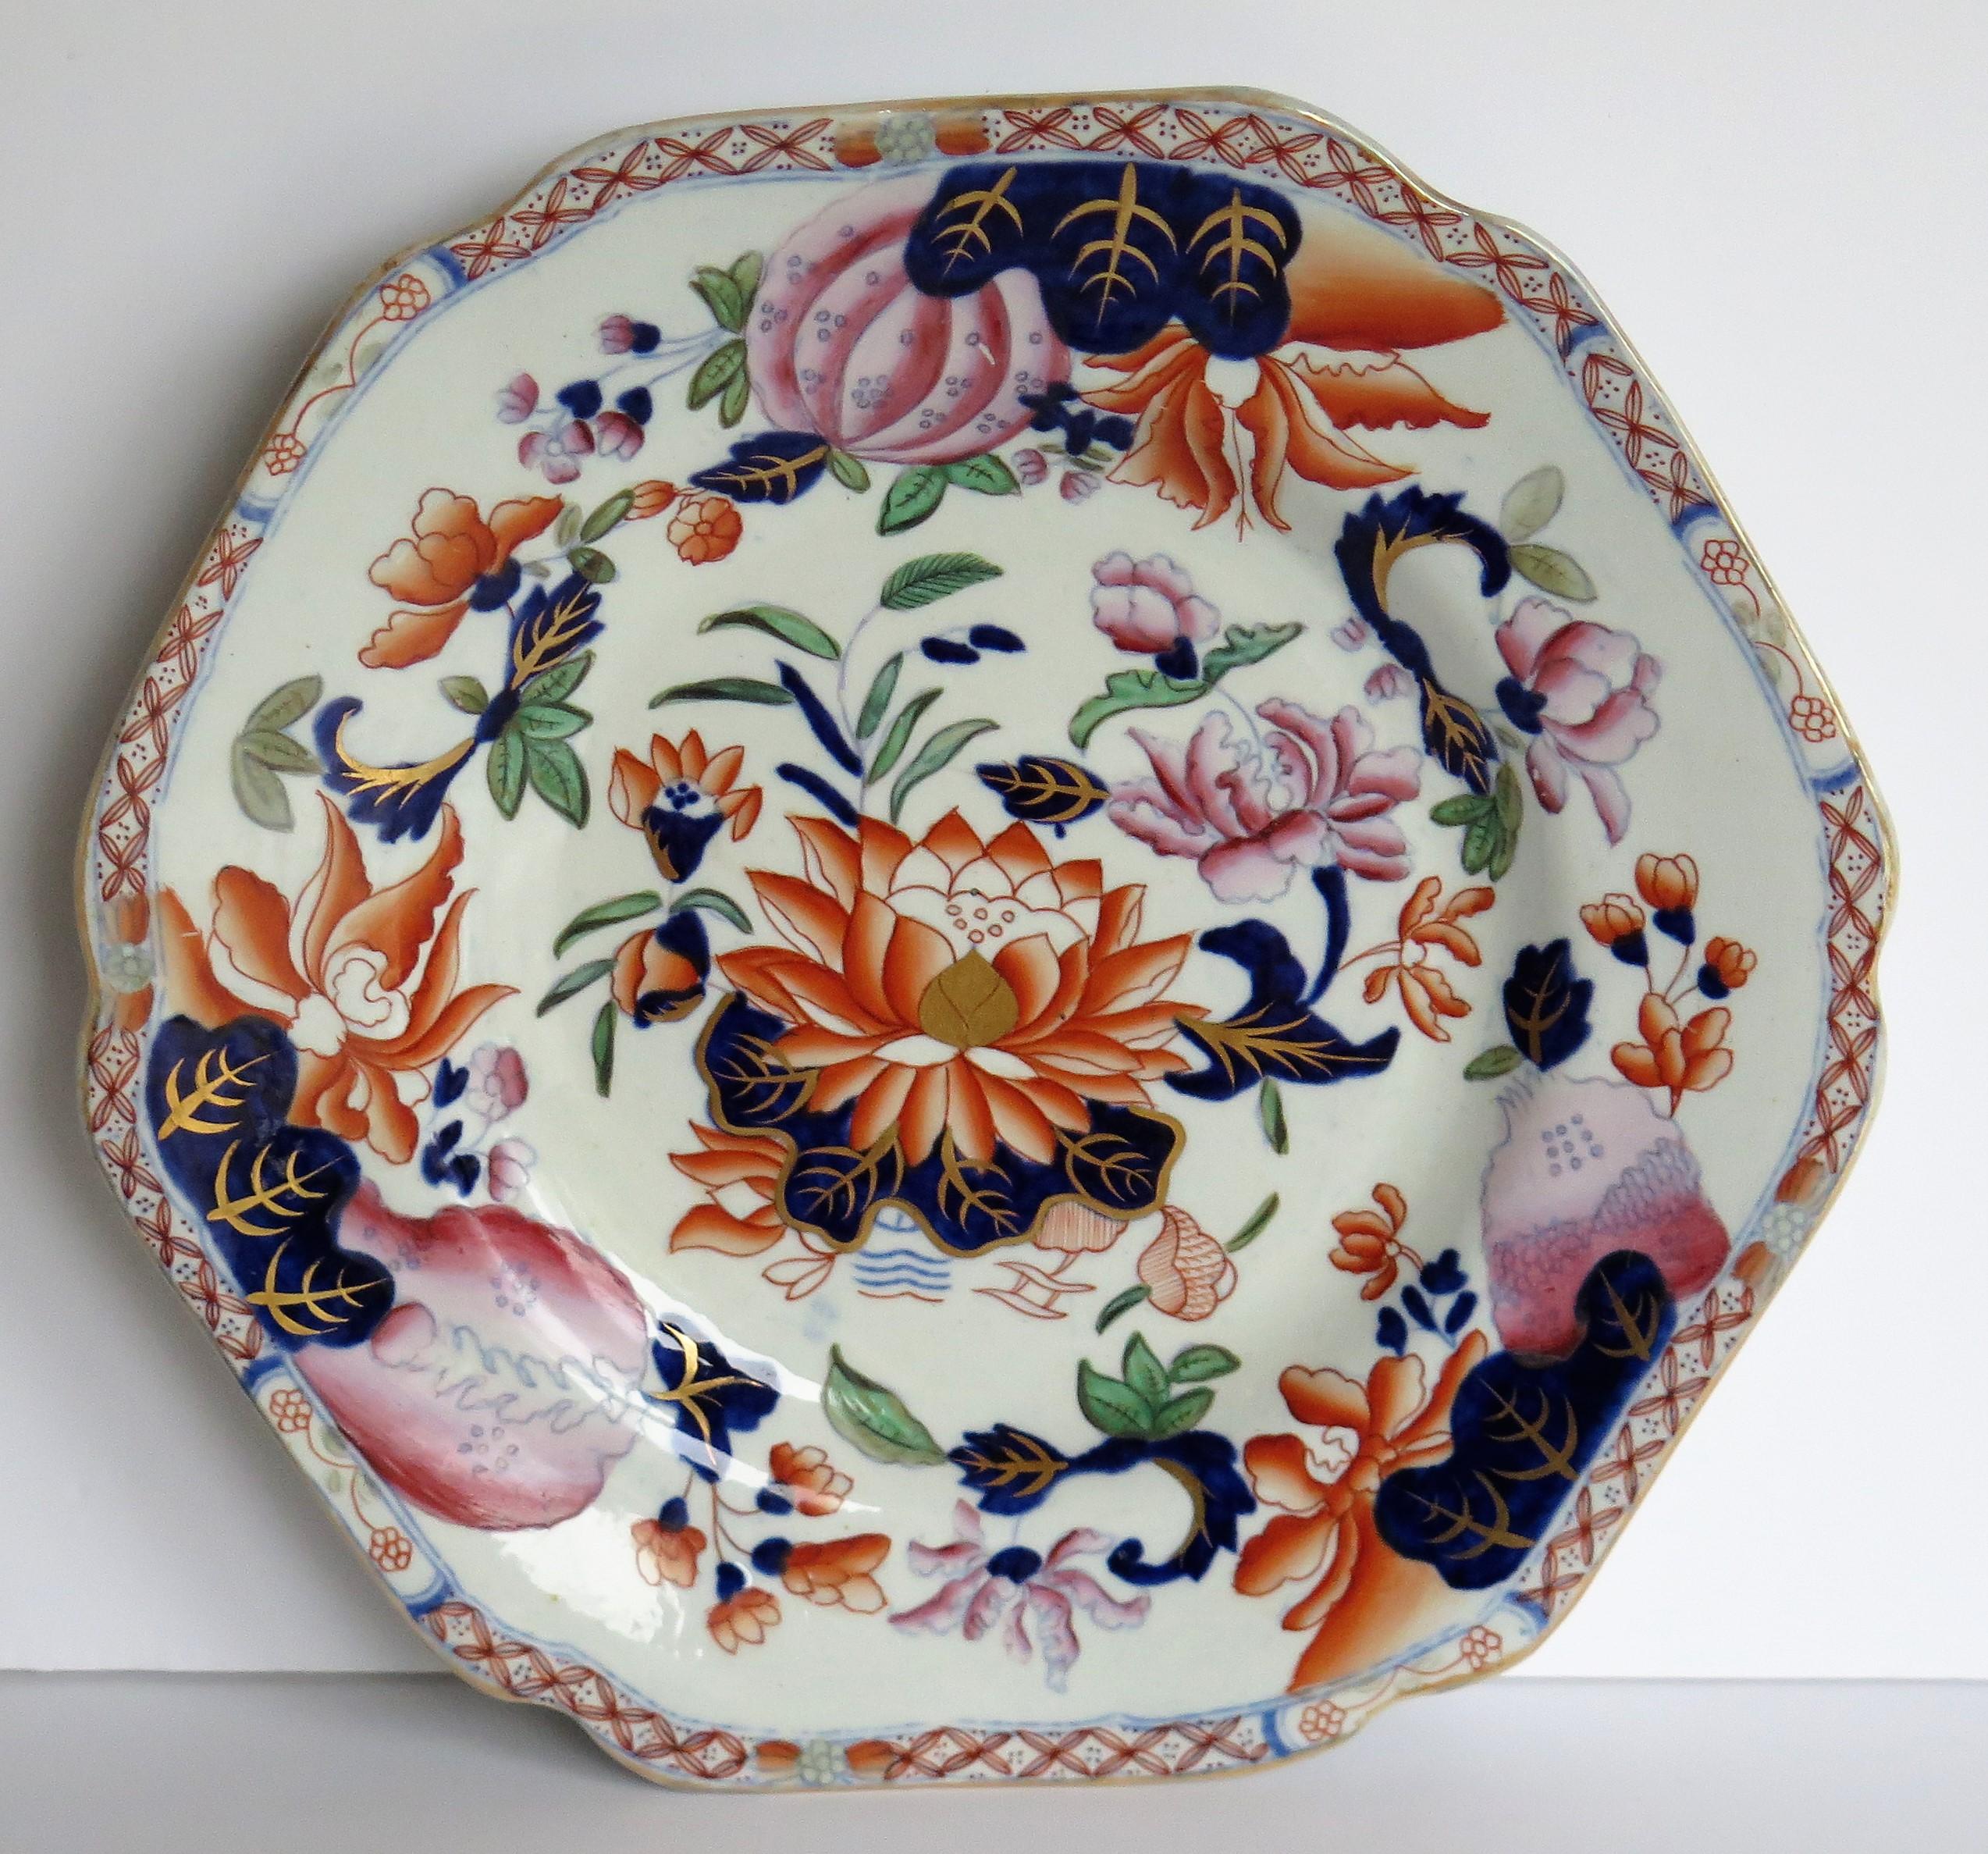 This is a very good hexagonal plate or dish in the Water Lily pattern, made by Hicks and Meigh of Shelton, Staffordshire, England between 1812 and 1822, probably circa 1815.

This is a beautiful plate or dish of a shaped hexagonal form on a raised